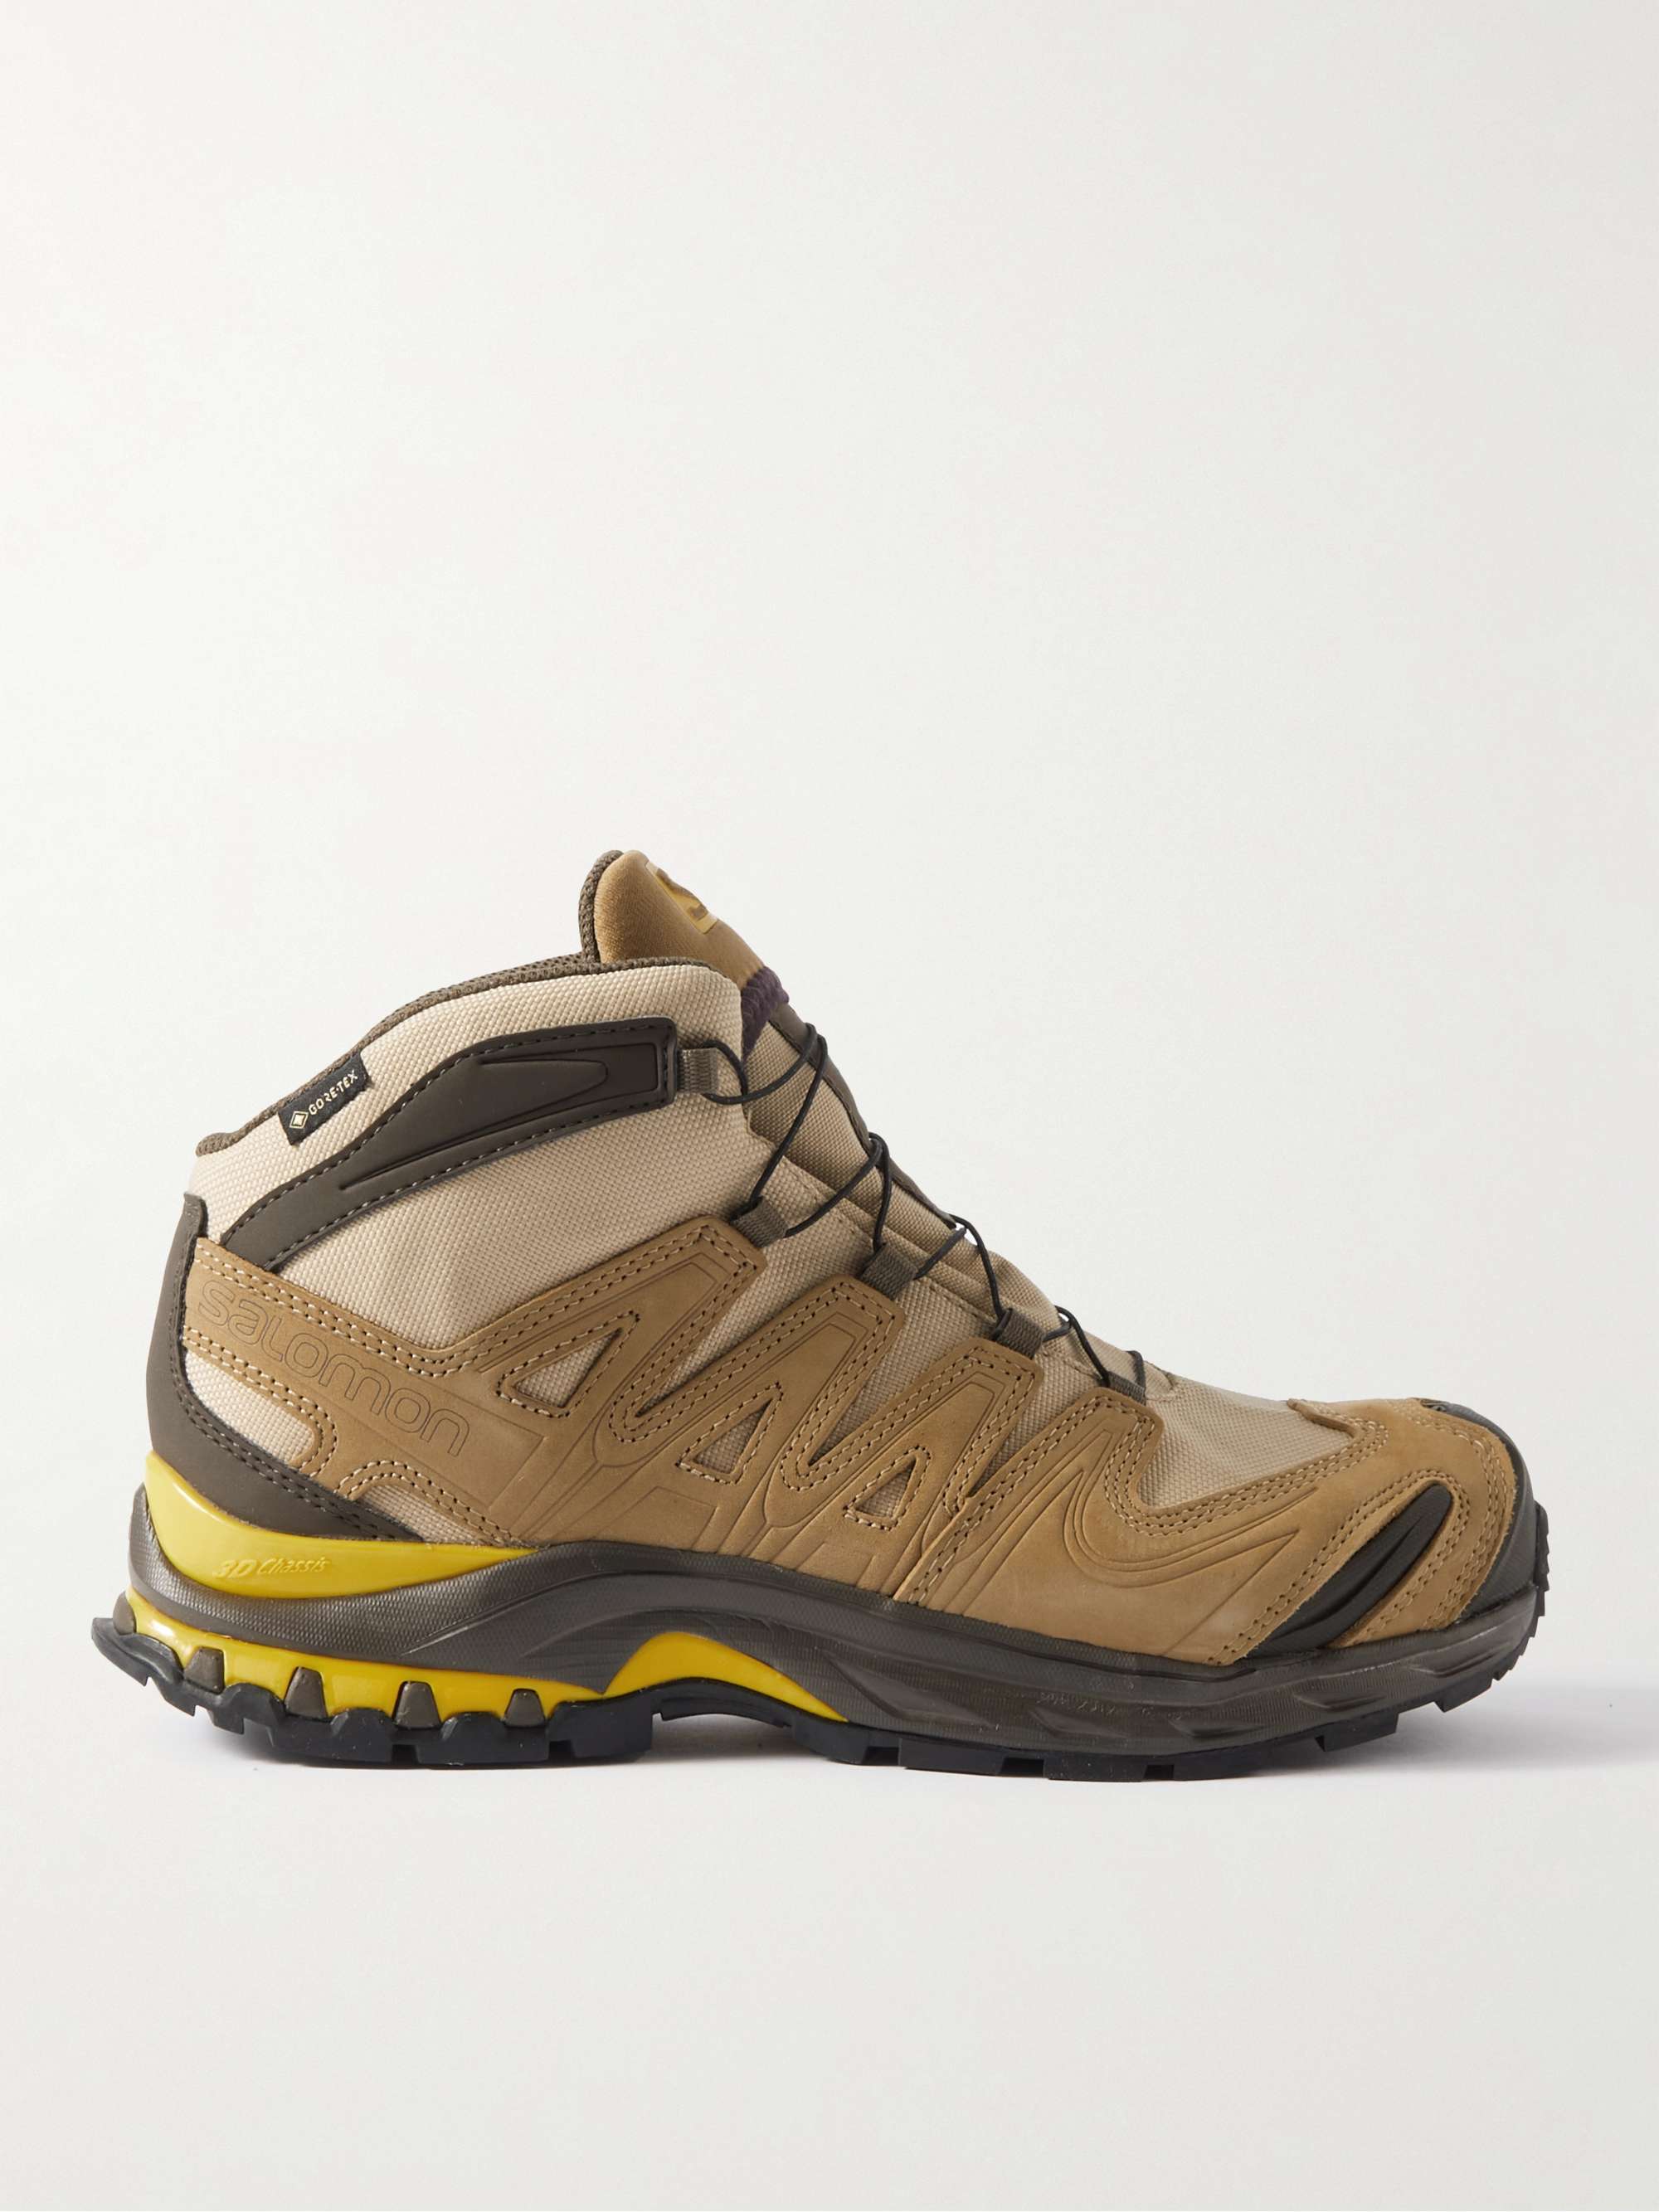 SALOMON + Better Gift Shop XA Pro 3D Leather and Rubber Sneakers | MR PORTER